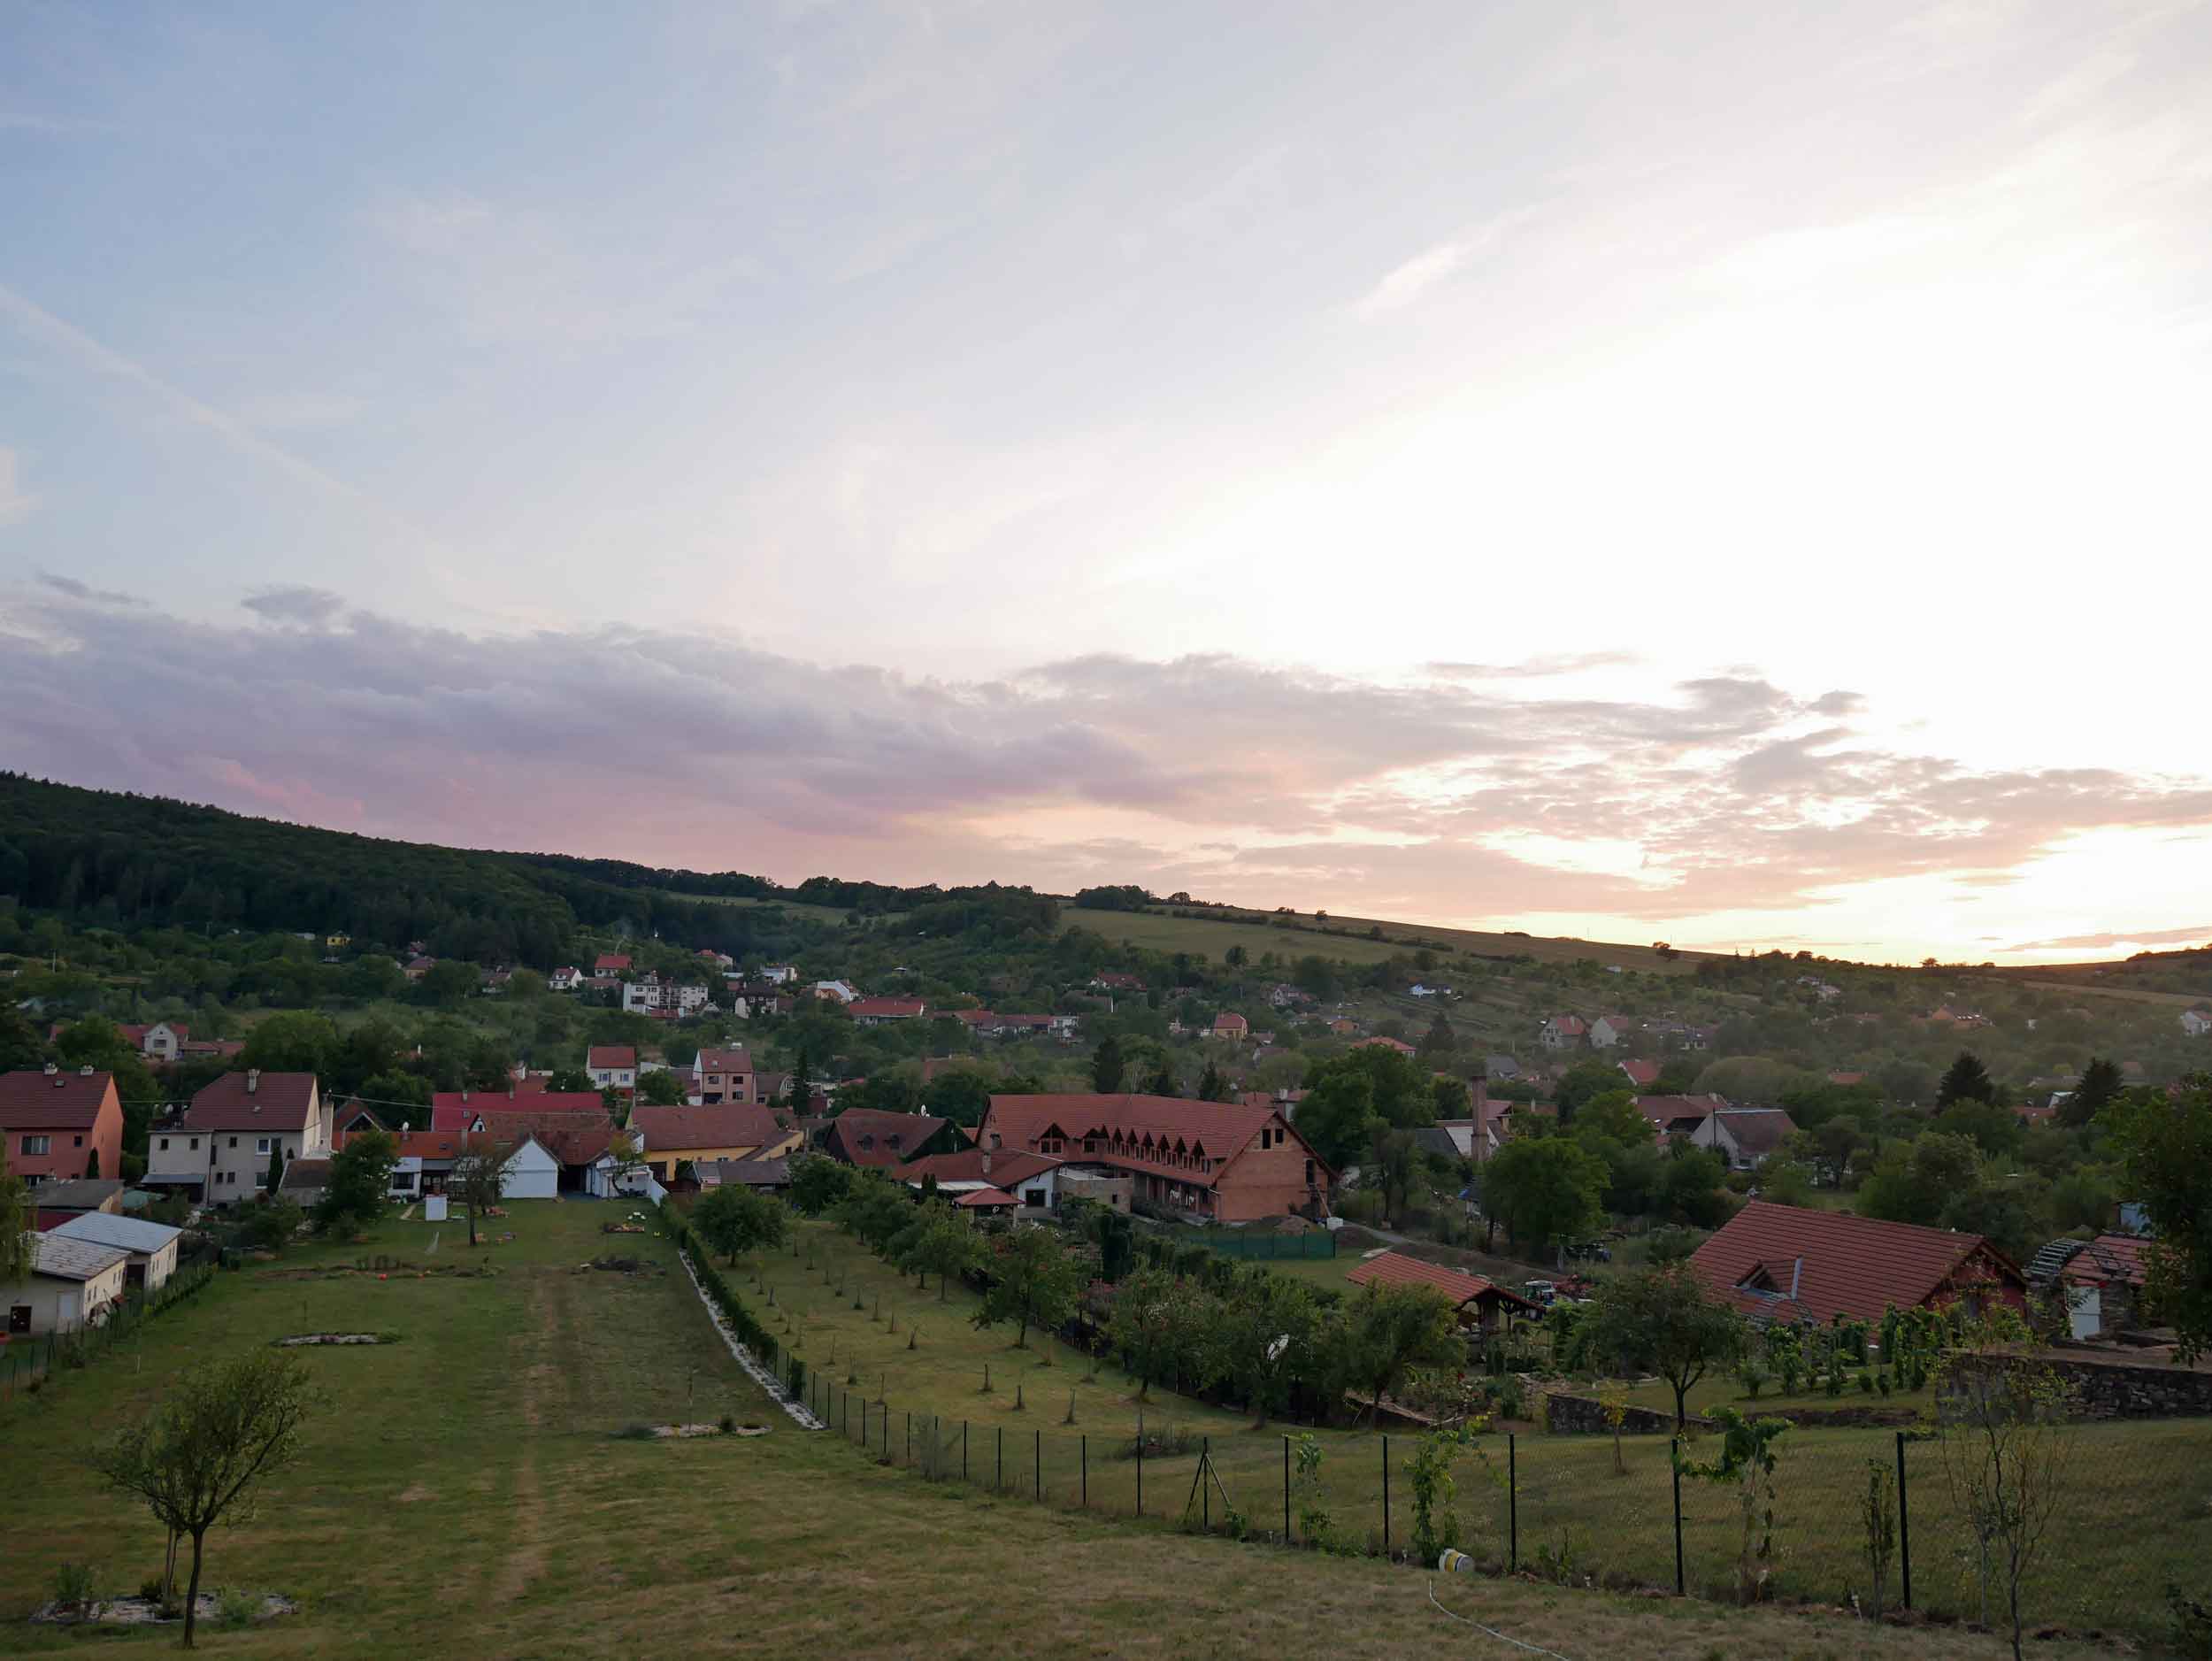  Sunset view from our cabin atop the rolling hills outside of Radějov, Czech Republic (Sept 5).&nbsp; 